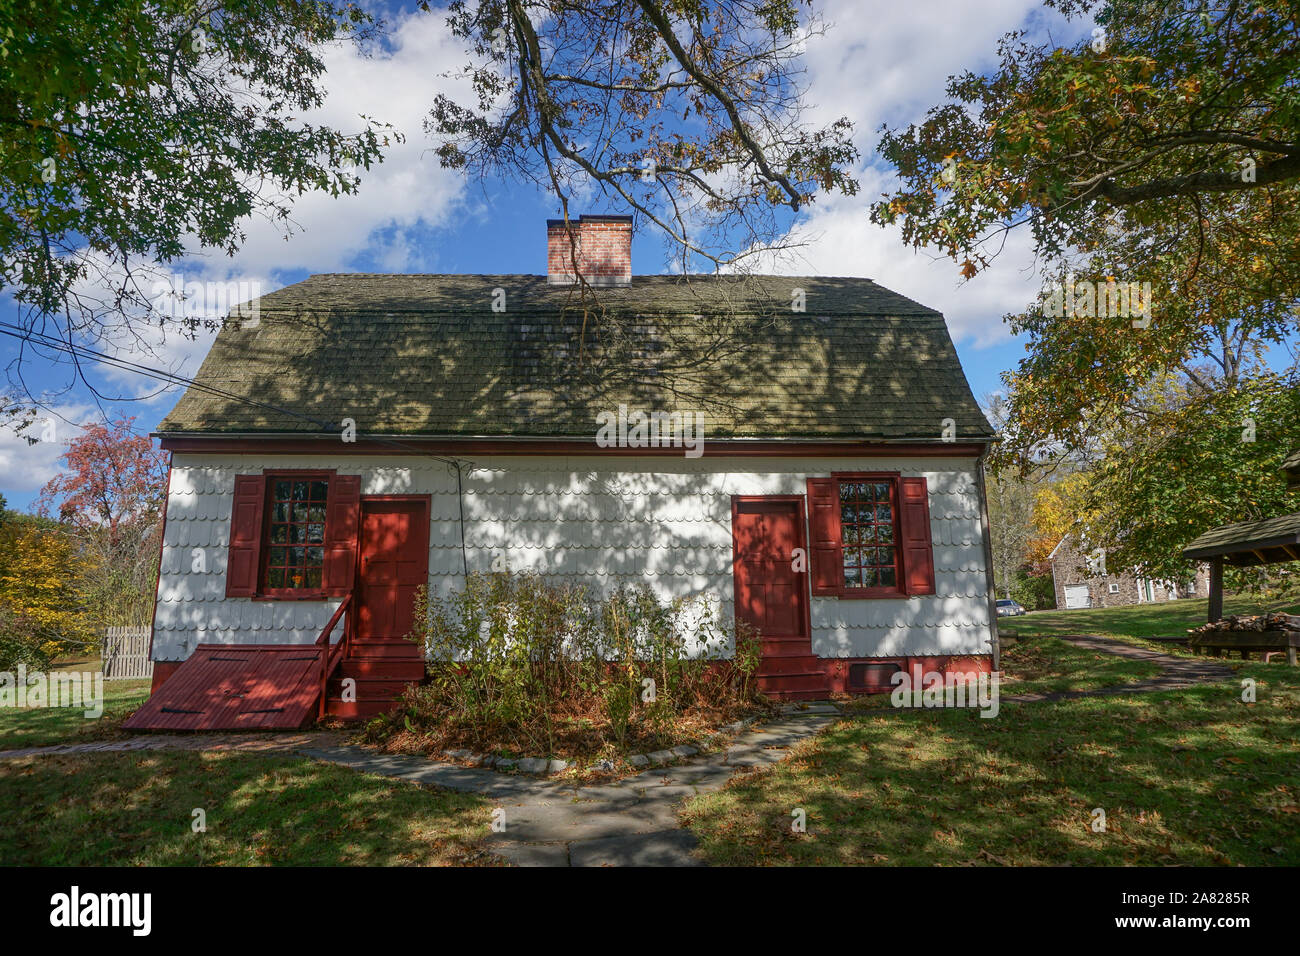 Washington Crossing, Titusville, NJ: Johnson Ferry House (c. 1740), at the site of George Washington's crossing of the Delaware River, December 1776. Stock Photo